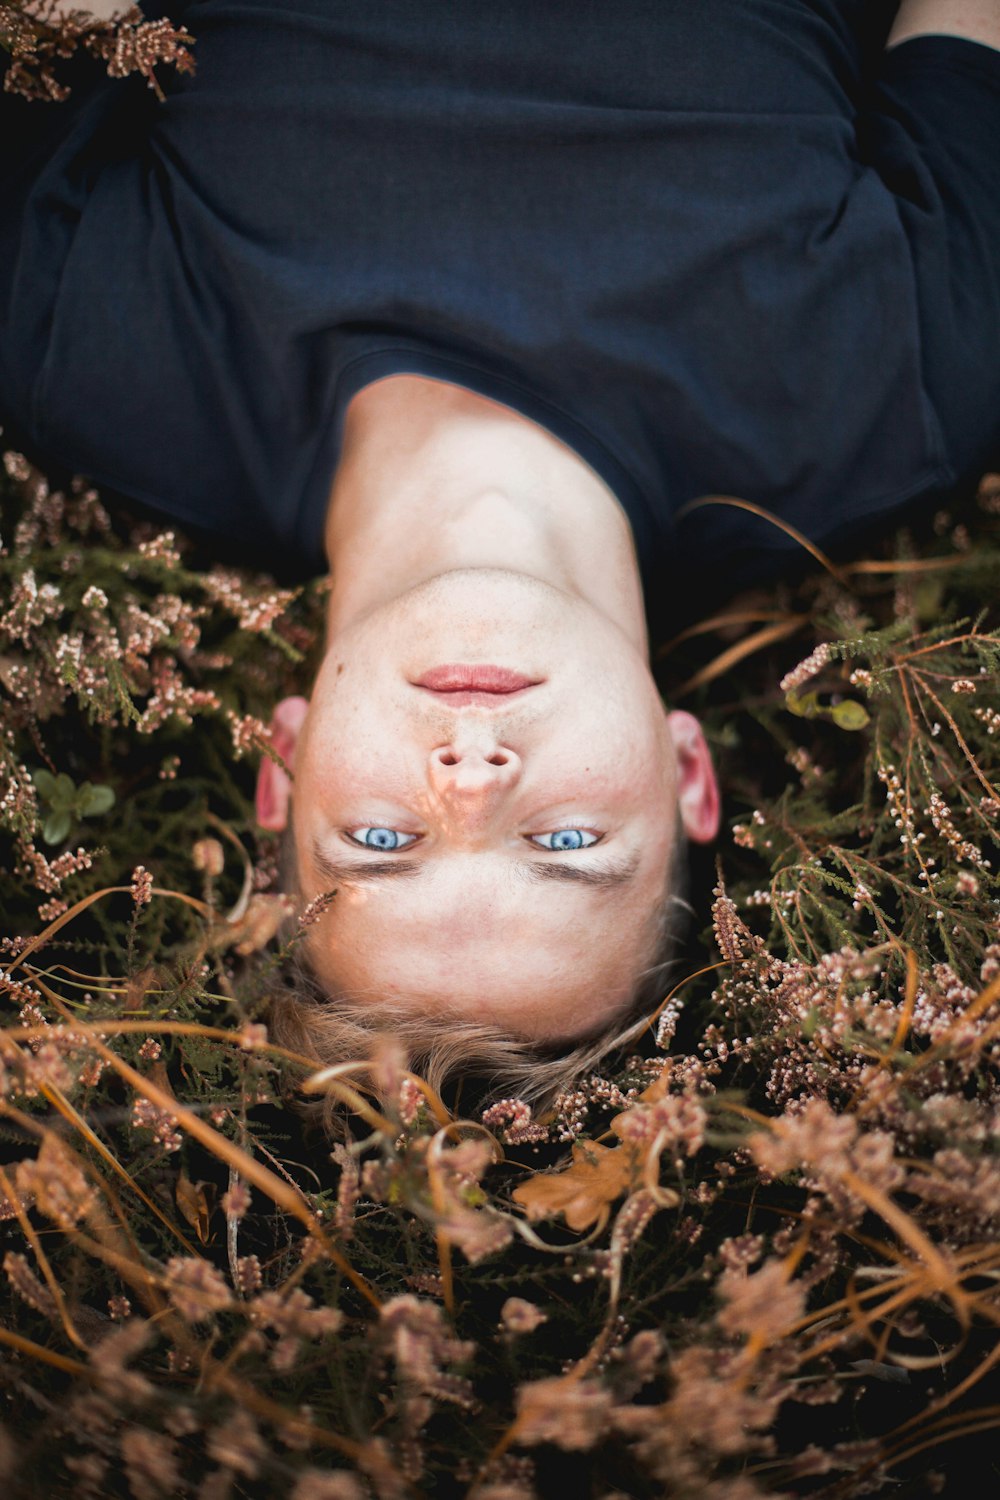 a woman laying in a field of flowers